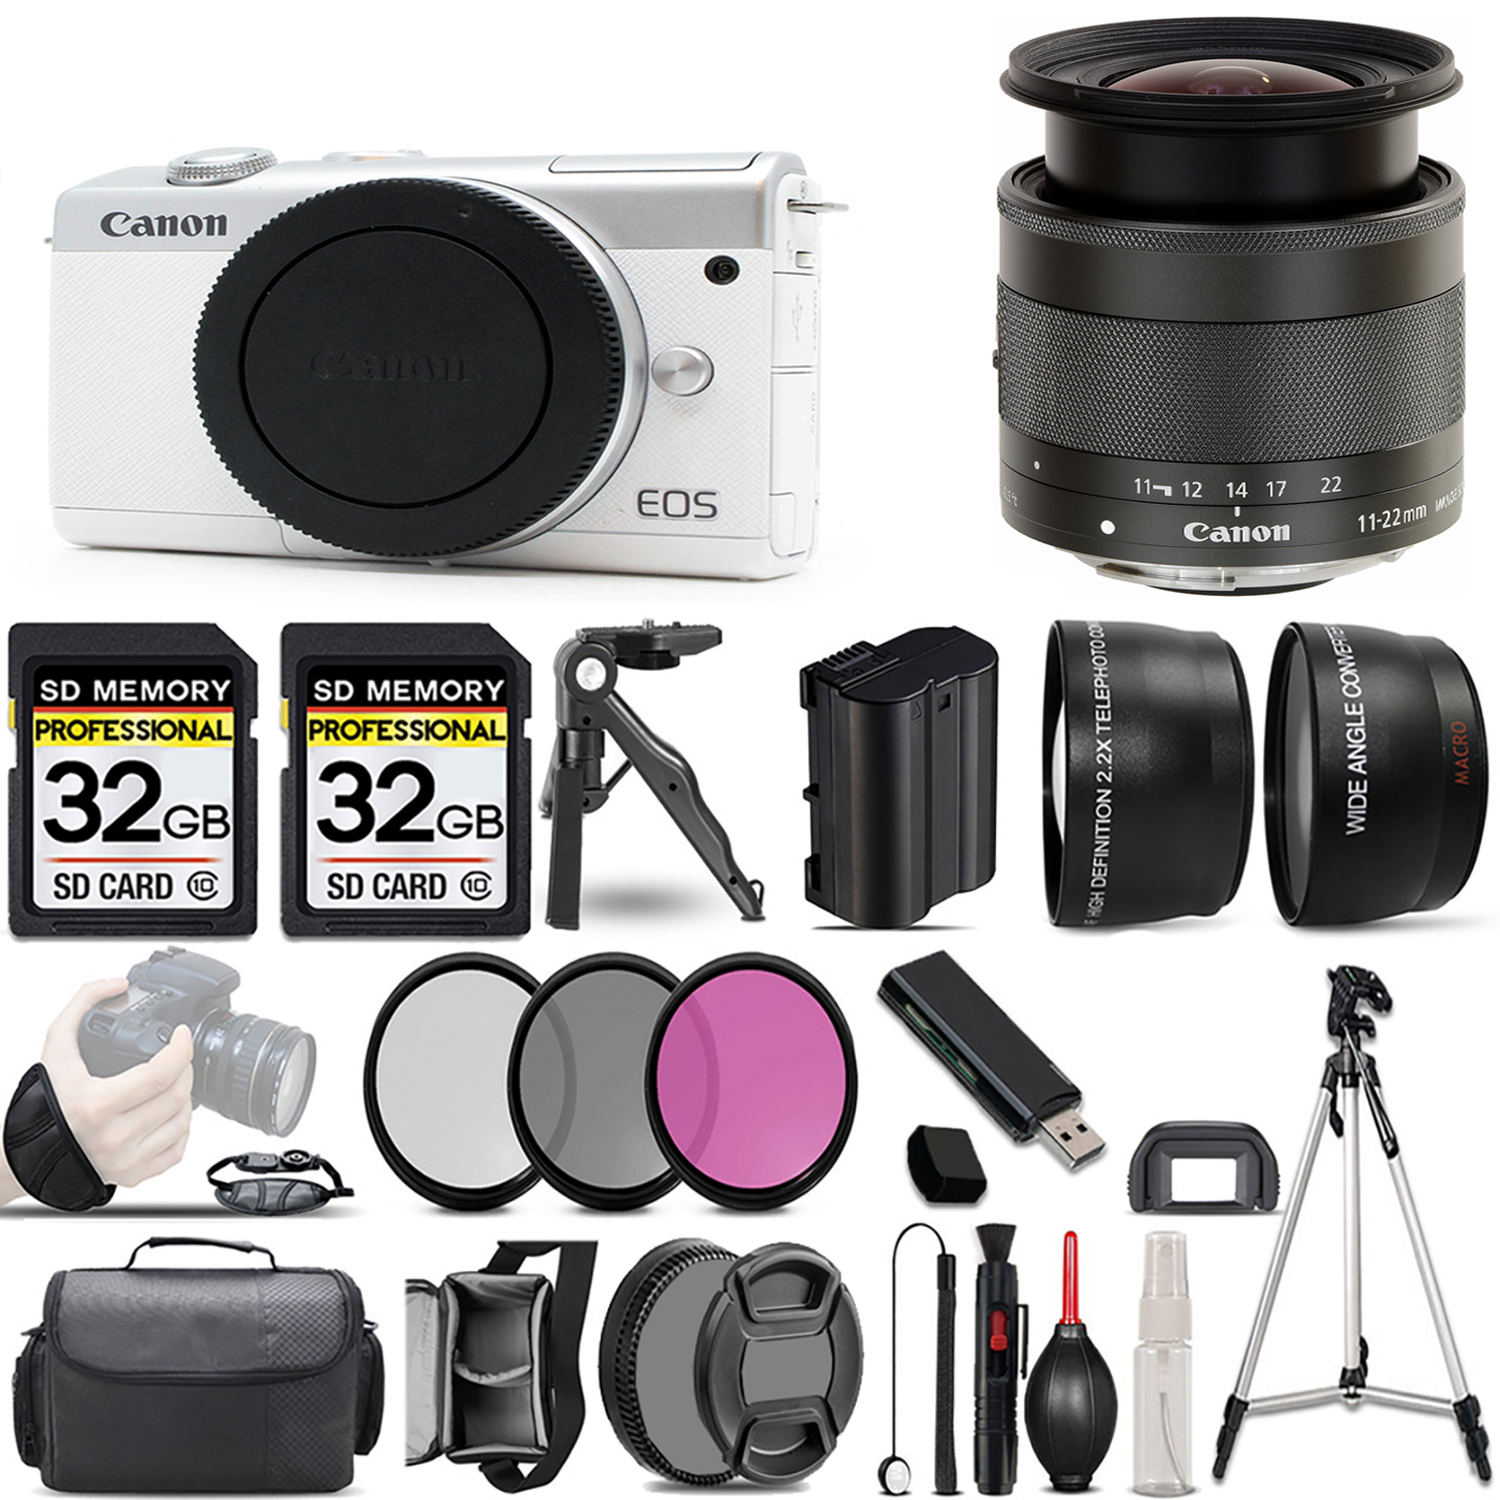 EOS M200  Camera (White) + 11-22mm f/4-5.6 IS STM Lens + 3 Piece Filter Set + 64GB *FREE SHIPPING*